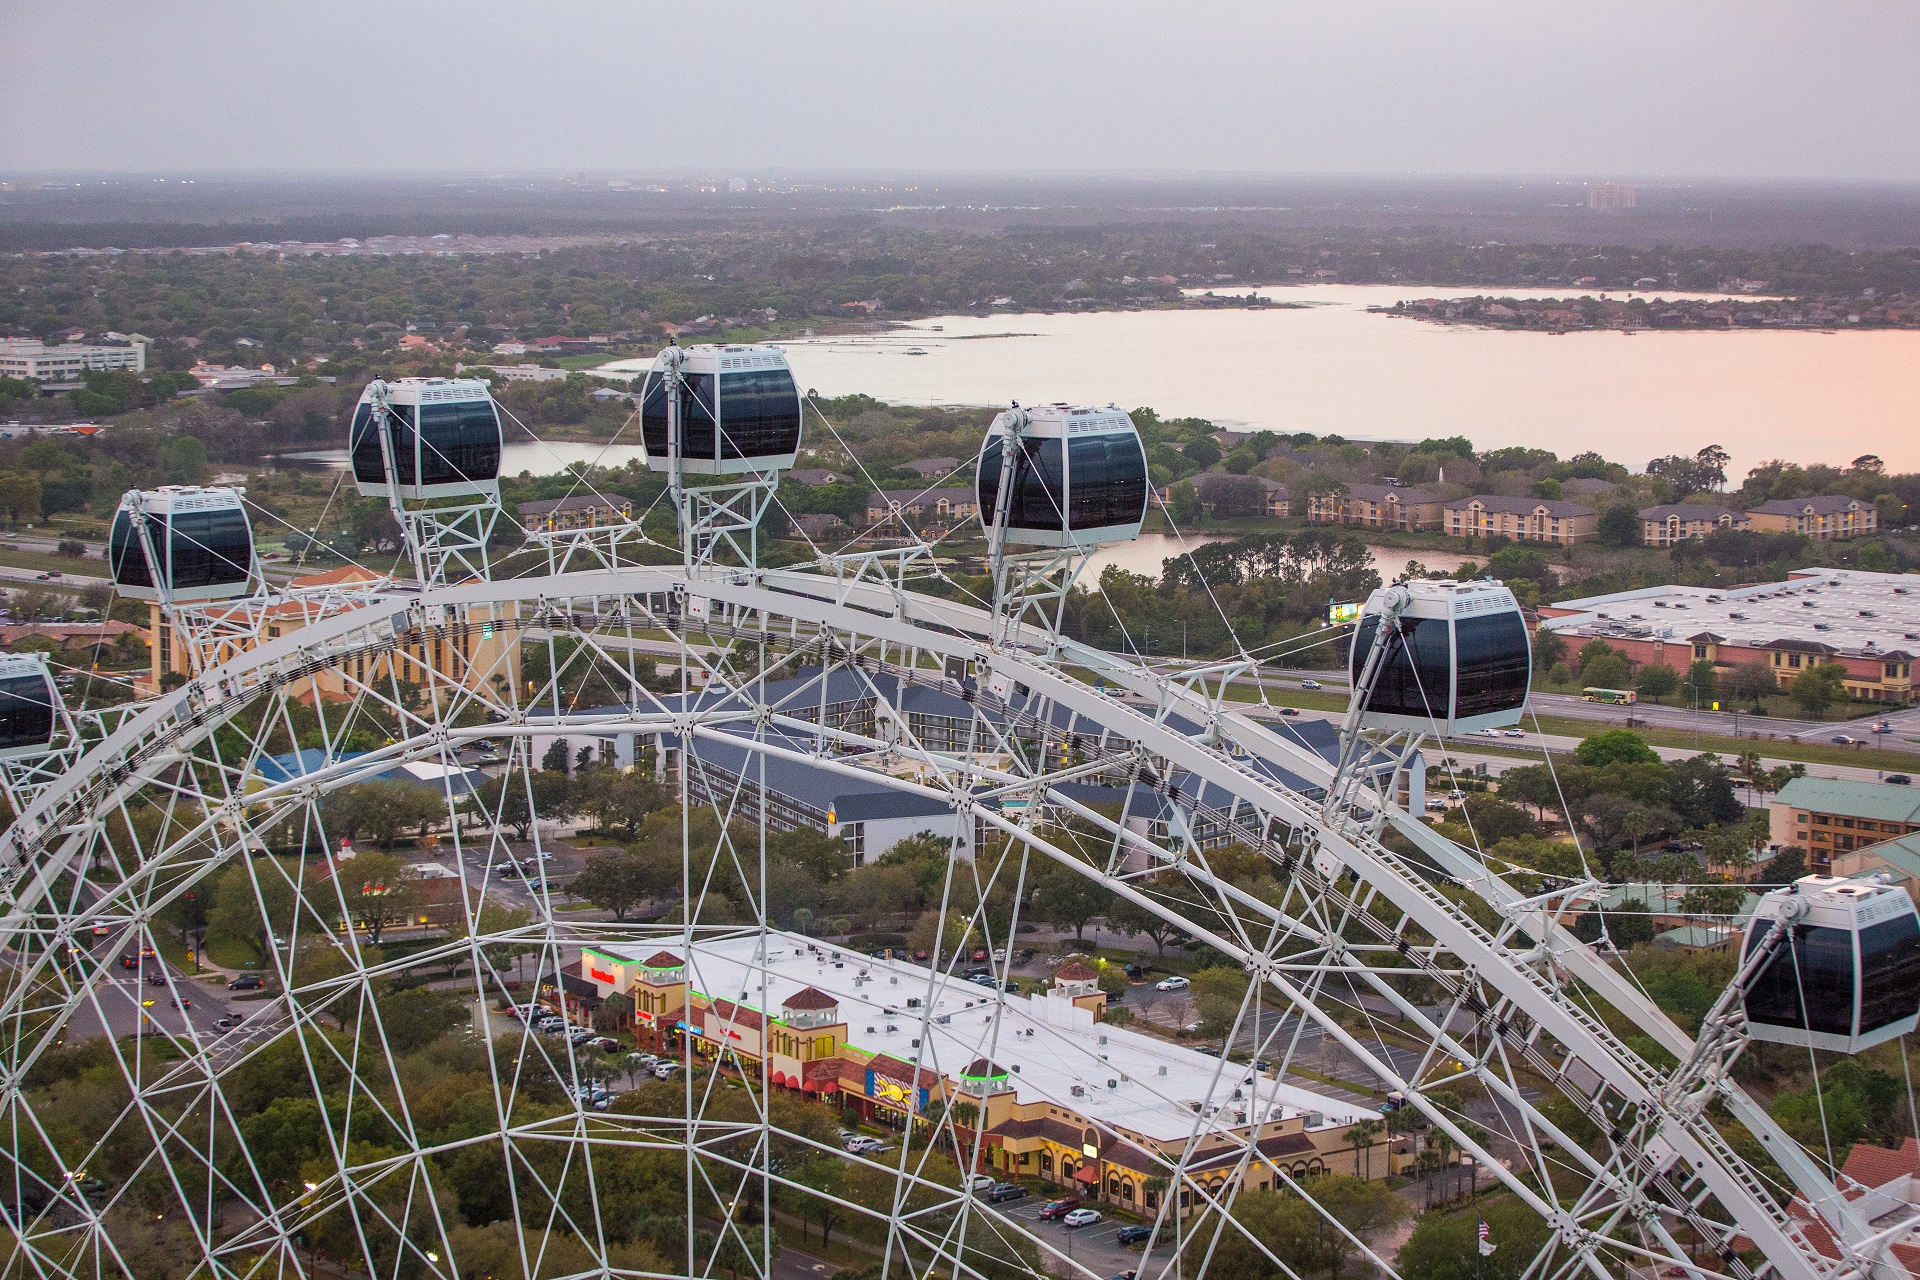 Several capsules of The Orlando Eye in the foreground with a lake in the background. The sun is also setting.